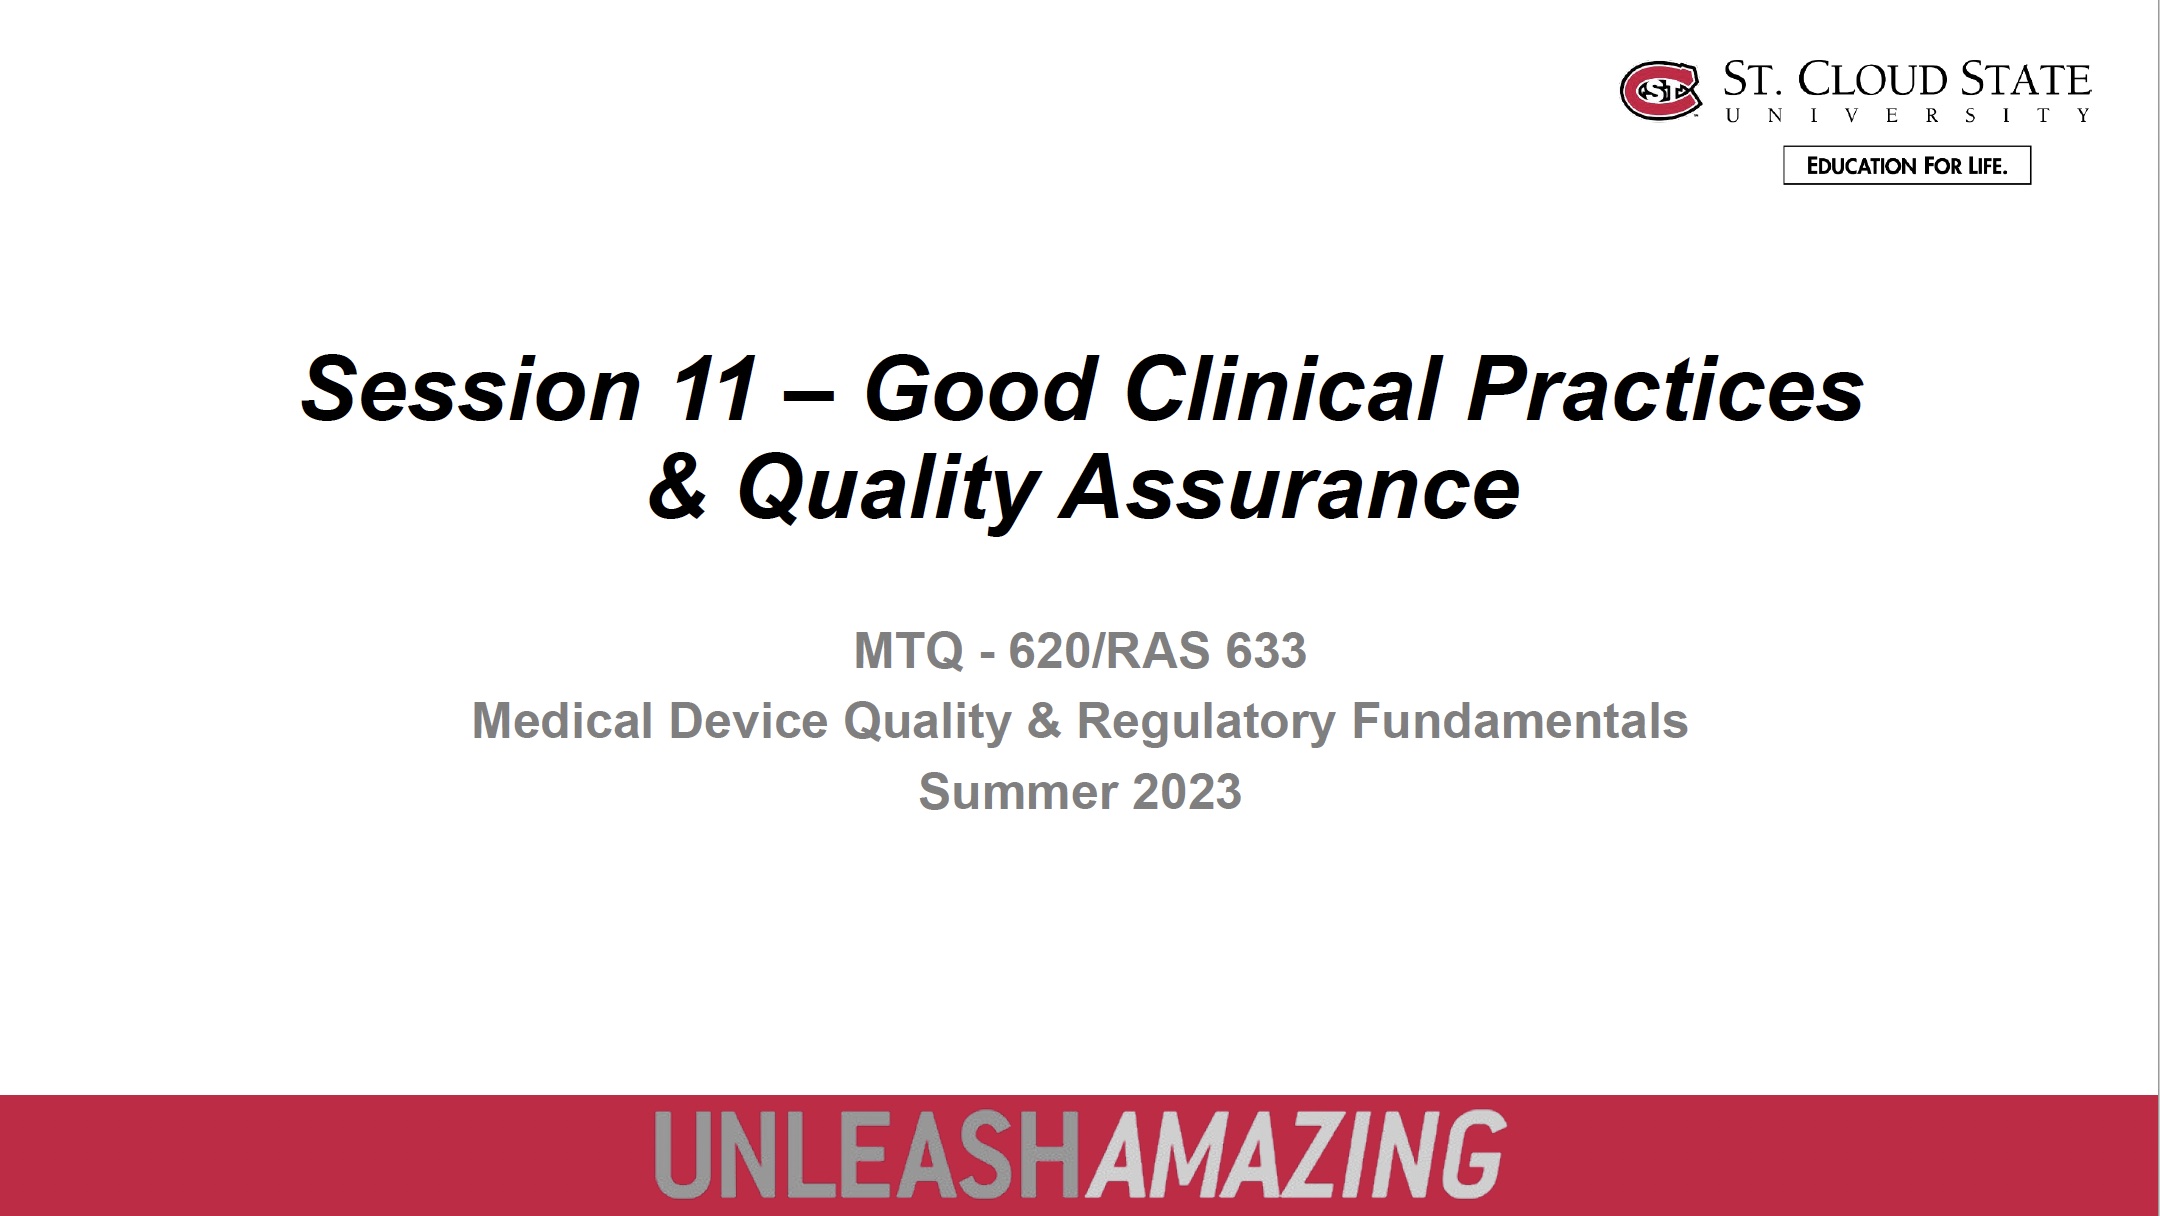 screenshot from slideshow on Good Clinical Practices & Quality Assurance